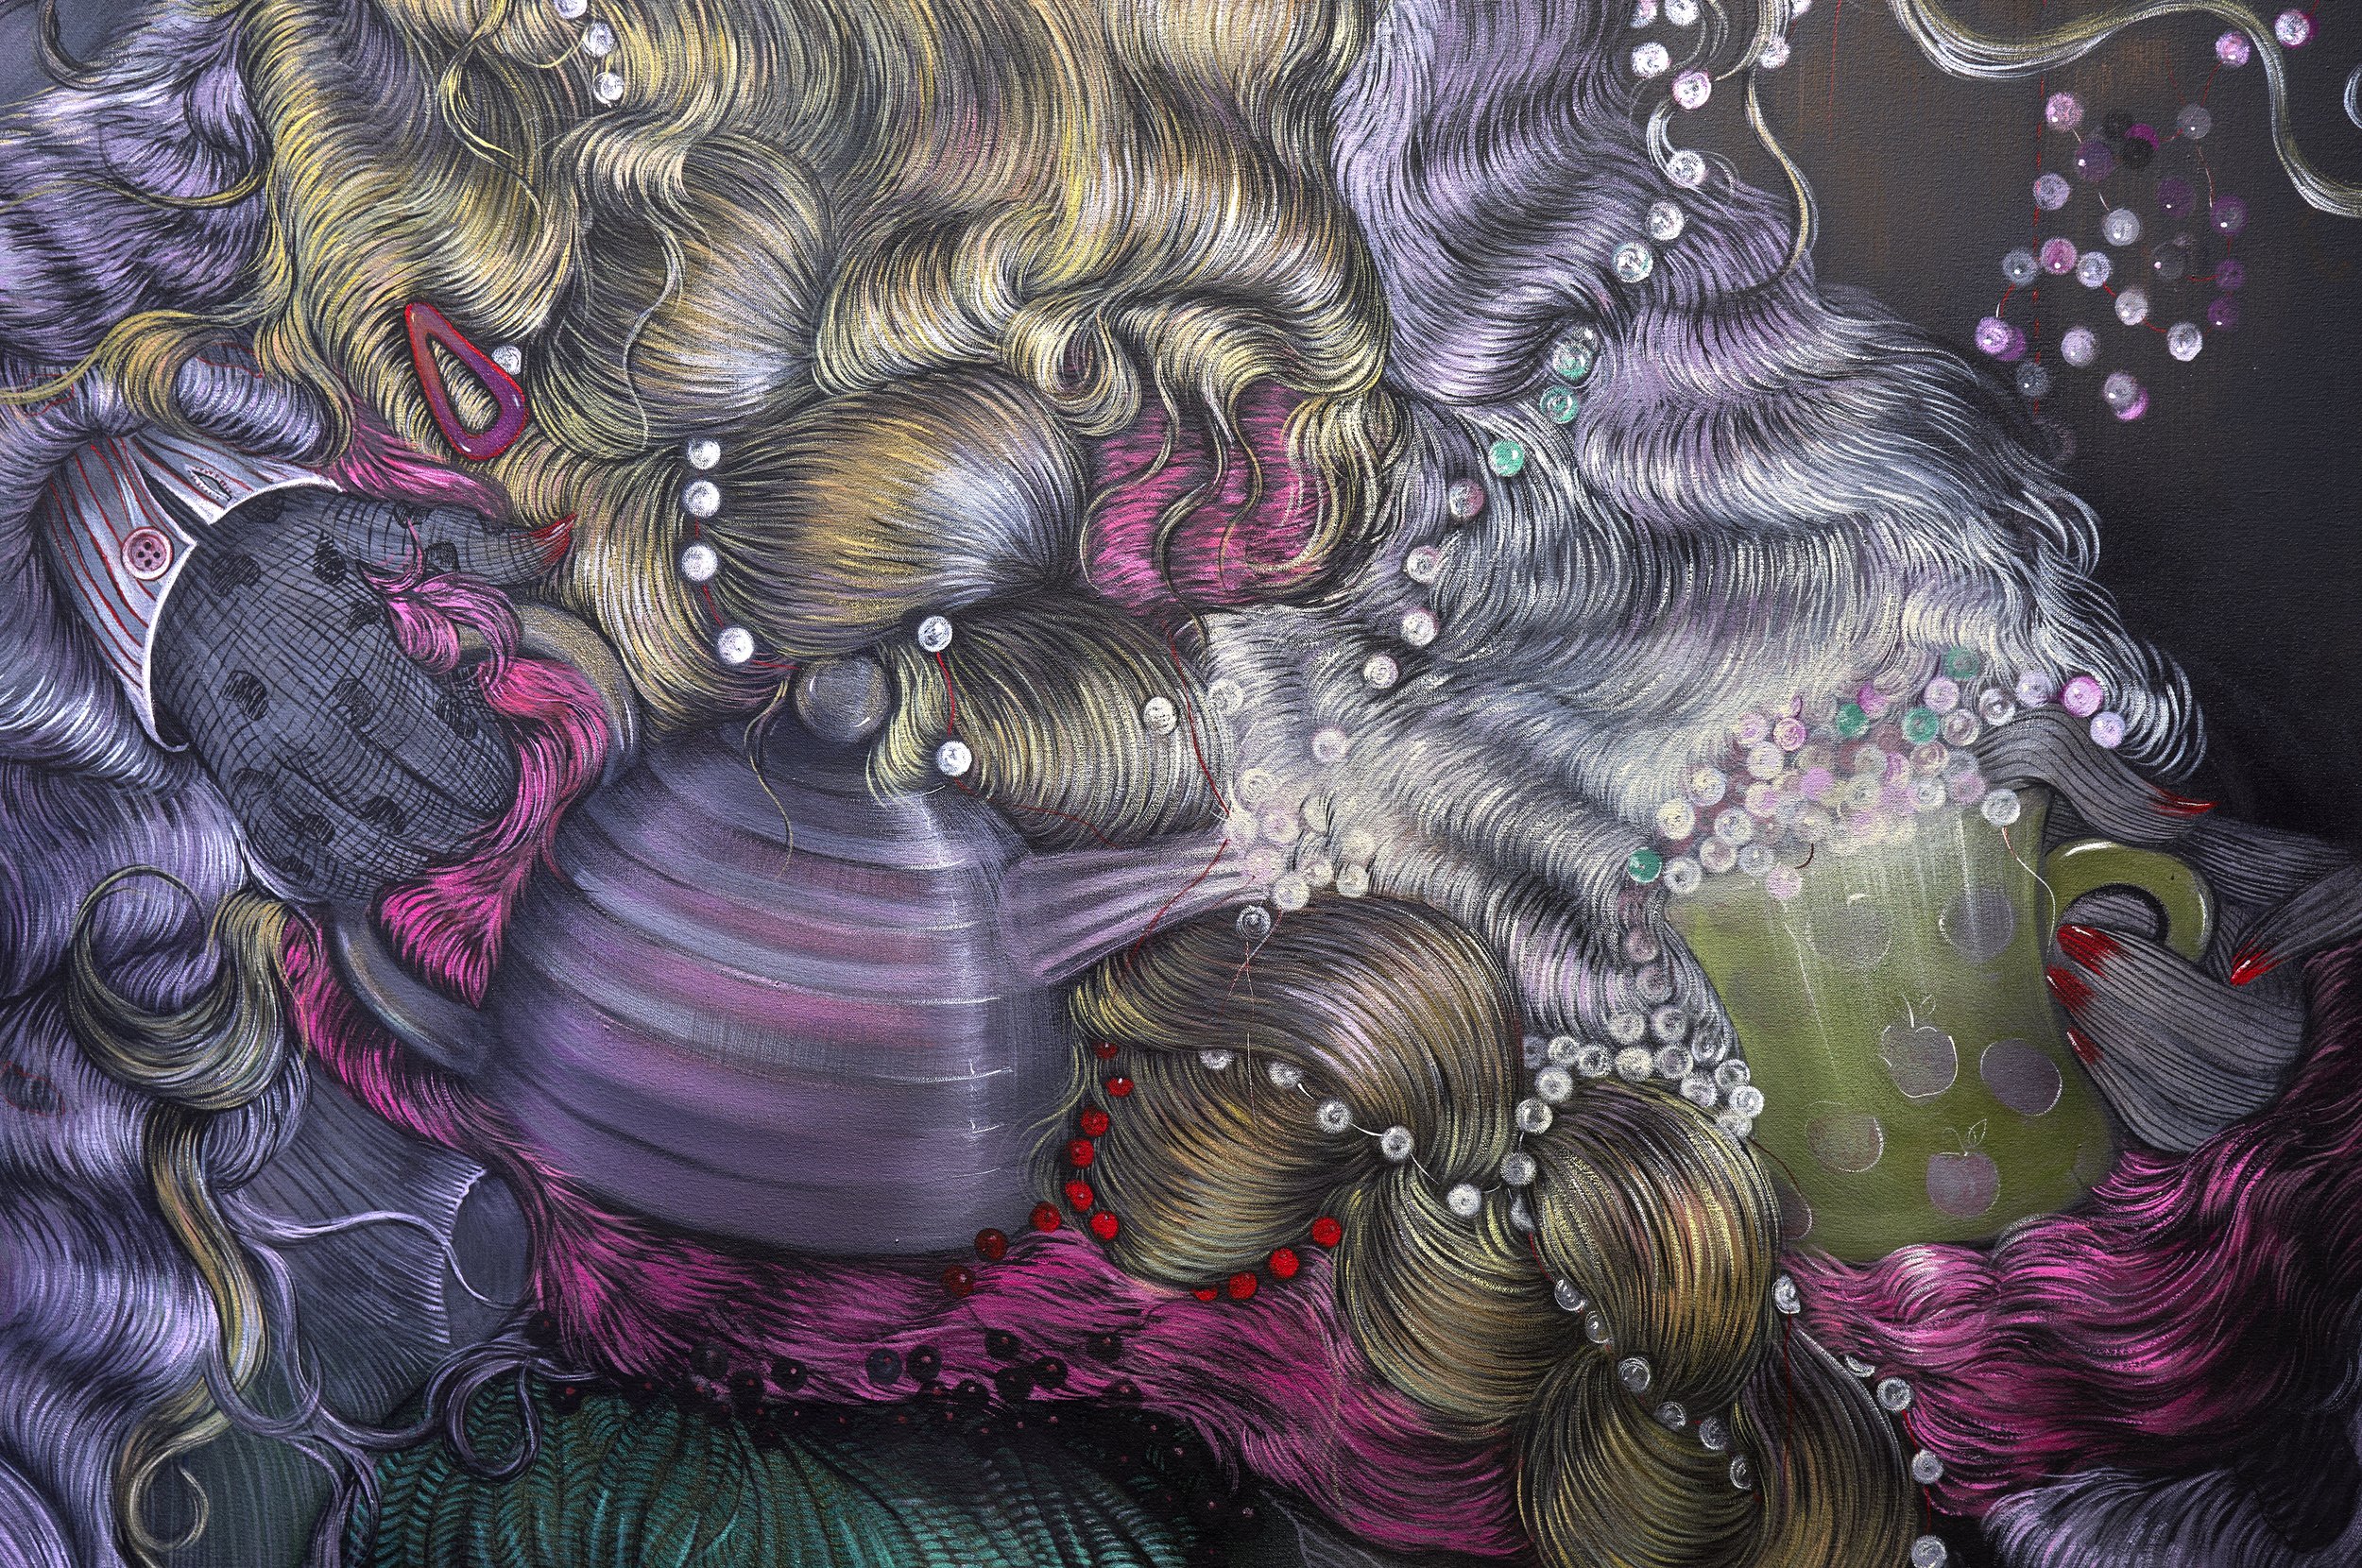  Is she domesticated enough? 2024  acrylic and airbrush ib canvas  60x60 inches (152.4x152.4 cm)  (detail) 